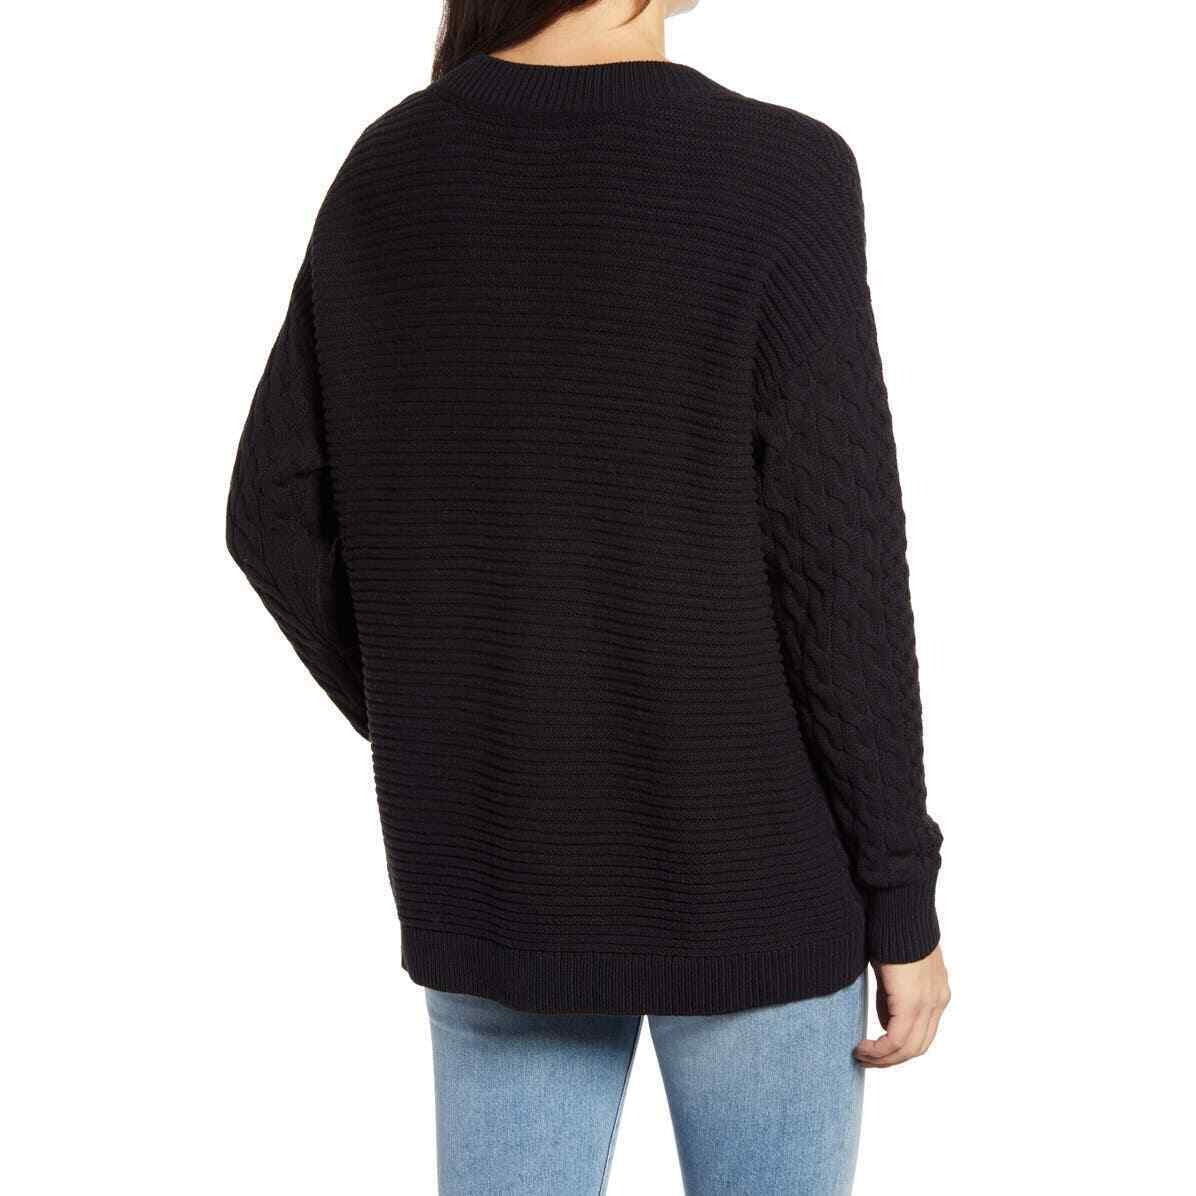 Caslon Cable V-Neck Pointelle Sweater Size XL Black NWT